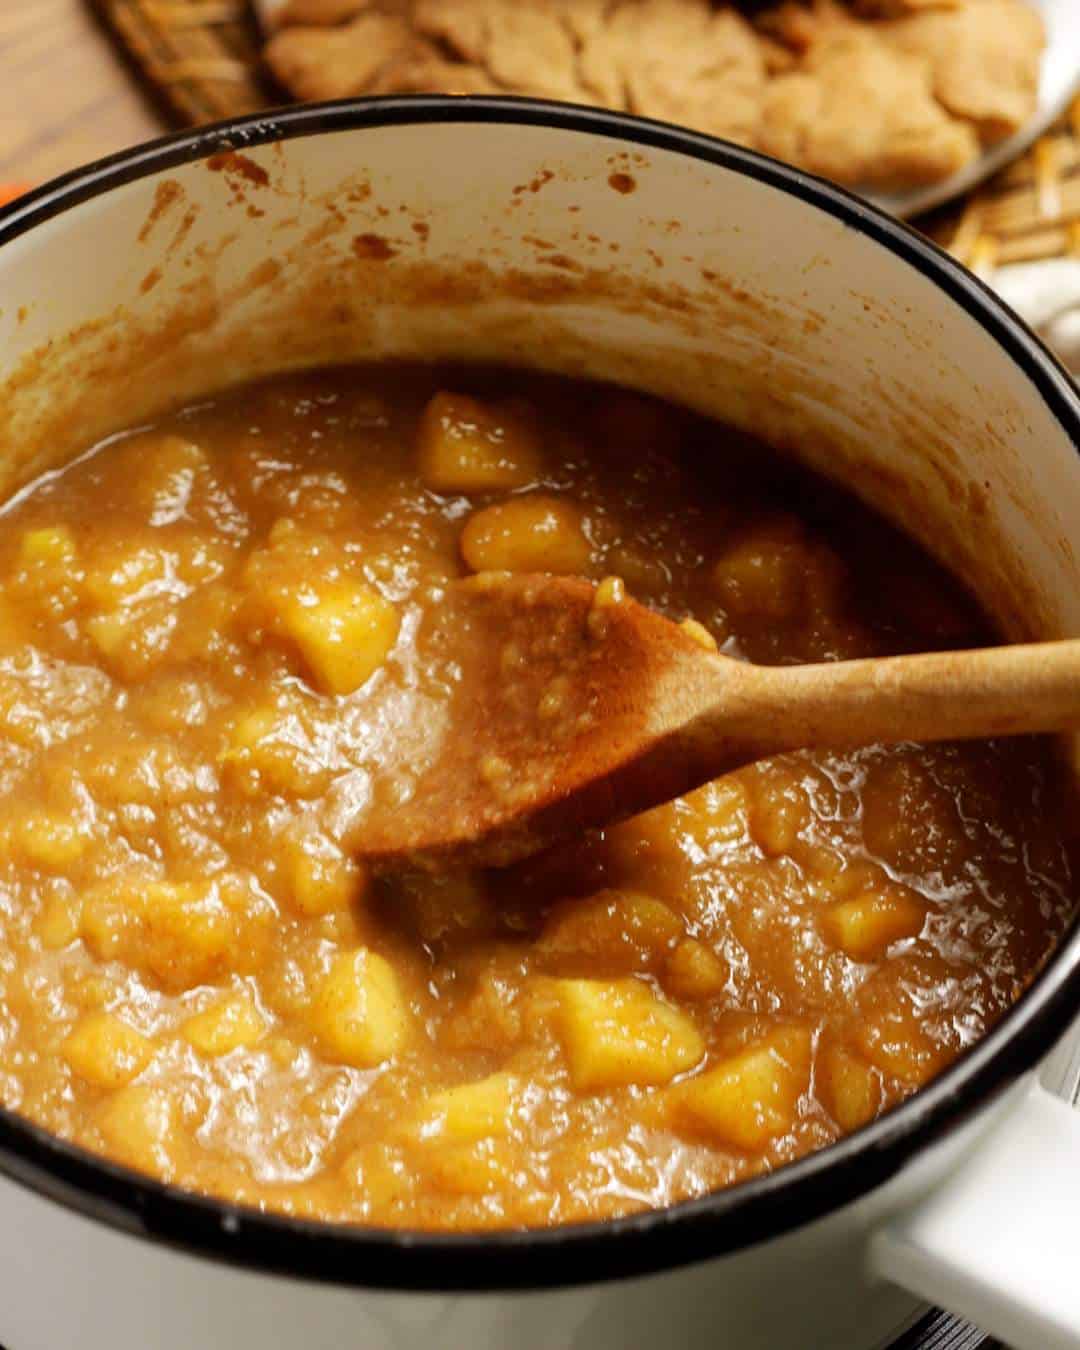 Caramelized apple mix can be seen in a saucepan with a wooden spoon.